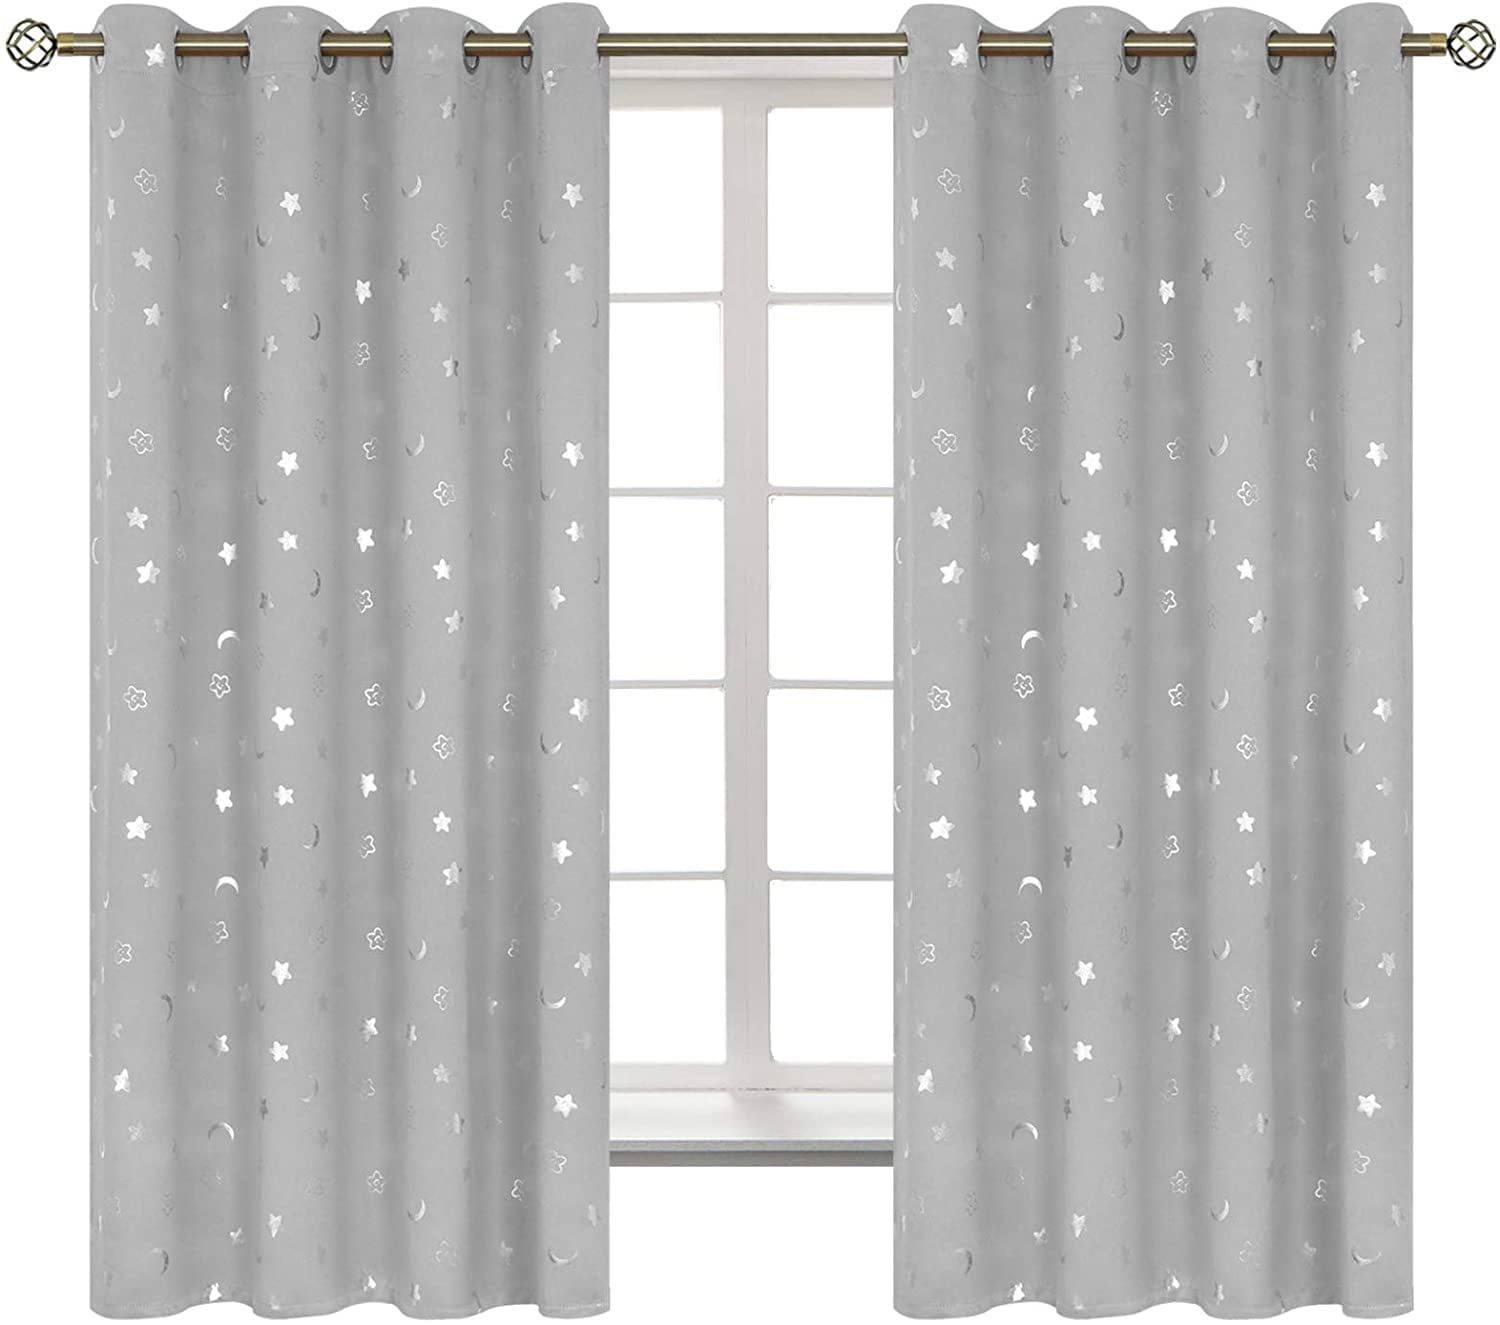 2 Panels of 42 x 63 Inch Emerald Green BGment Moon and Stars Blackout Curtains for Kids Bedroom Grommet Thermal Insulated Room Darkening Printed Curtains for Nursery 